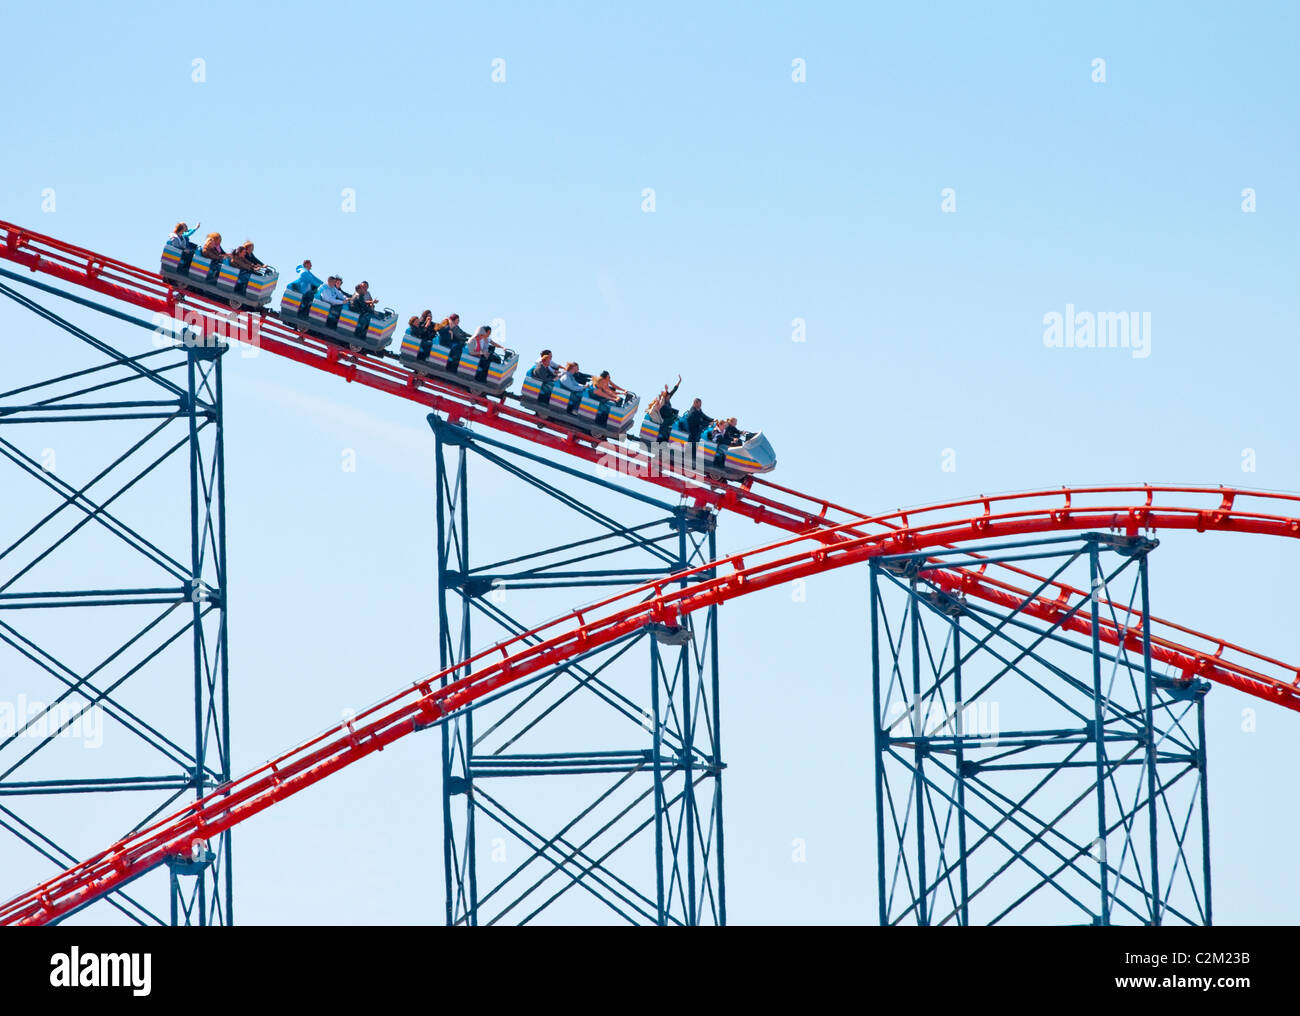 People on 'The Big One' rollercoaster ride at Blackpool Pleasure Beach. Stock Photo